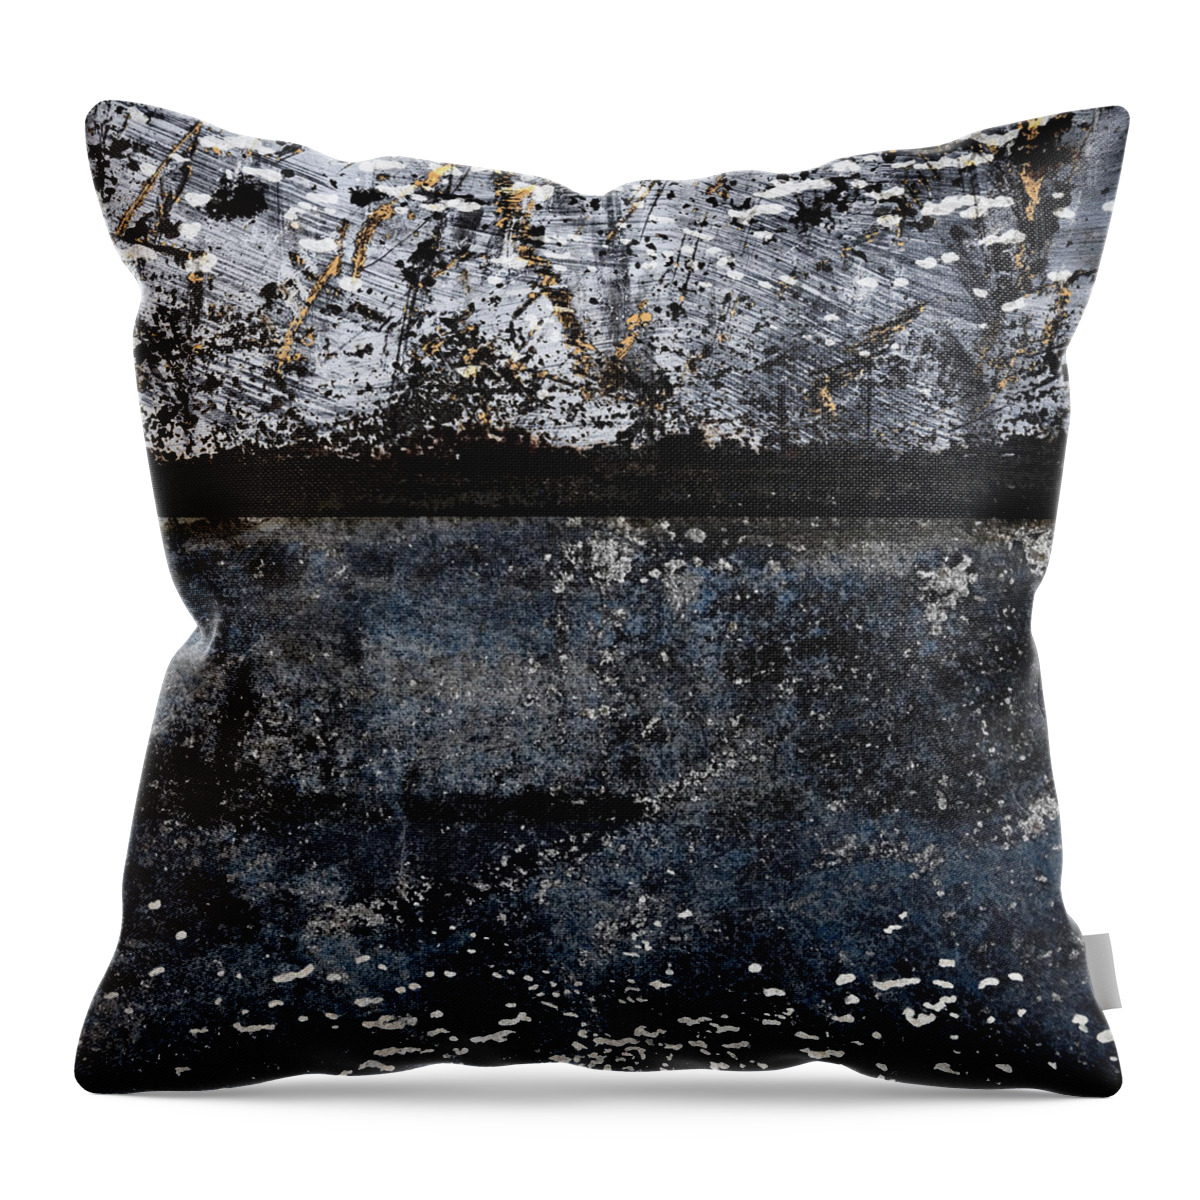 Blue Throw Pillow featuring the photograph Boat Textures by Carol Leigh